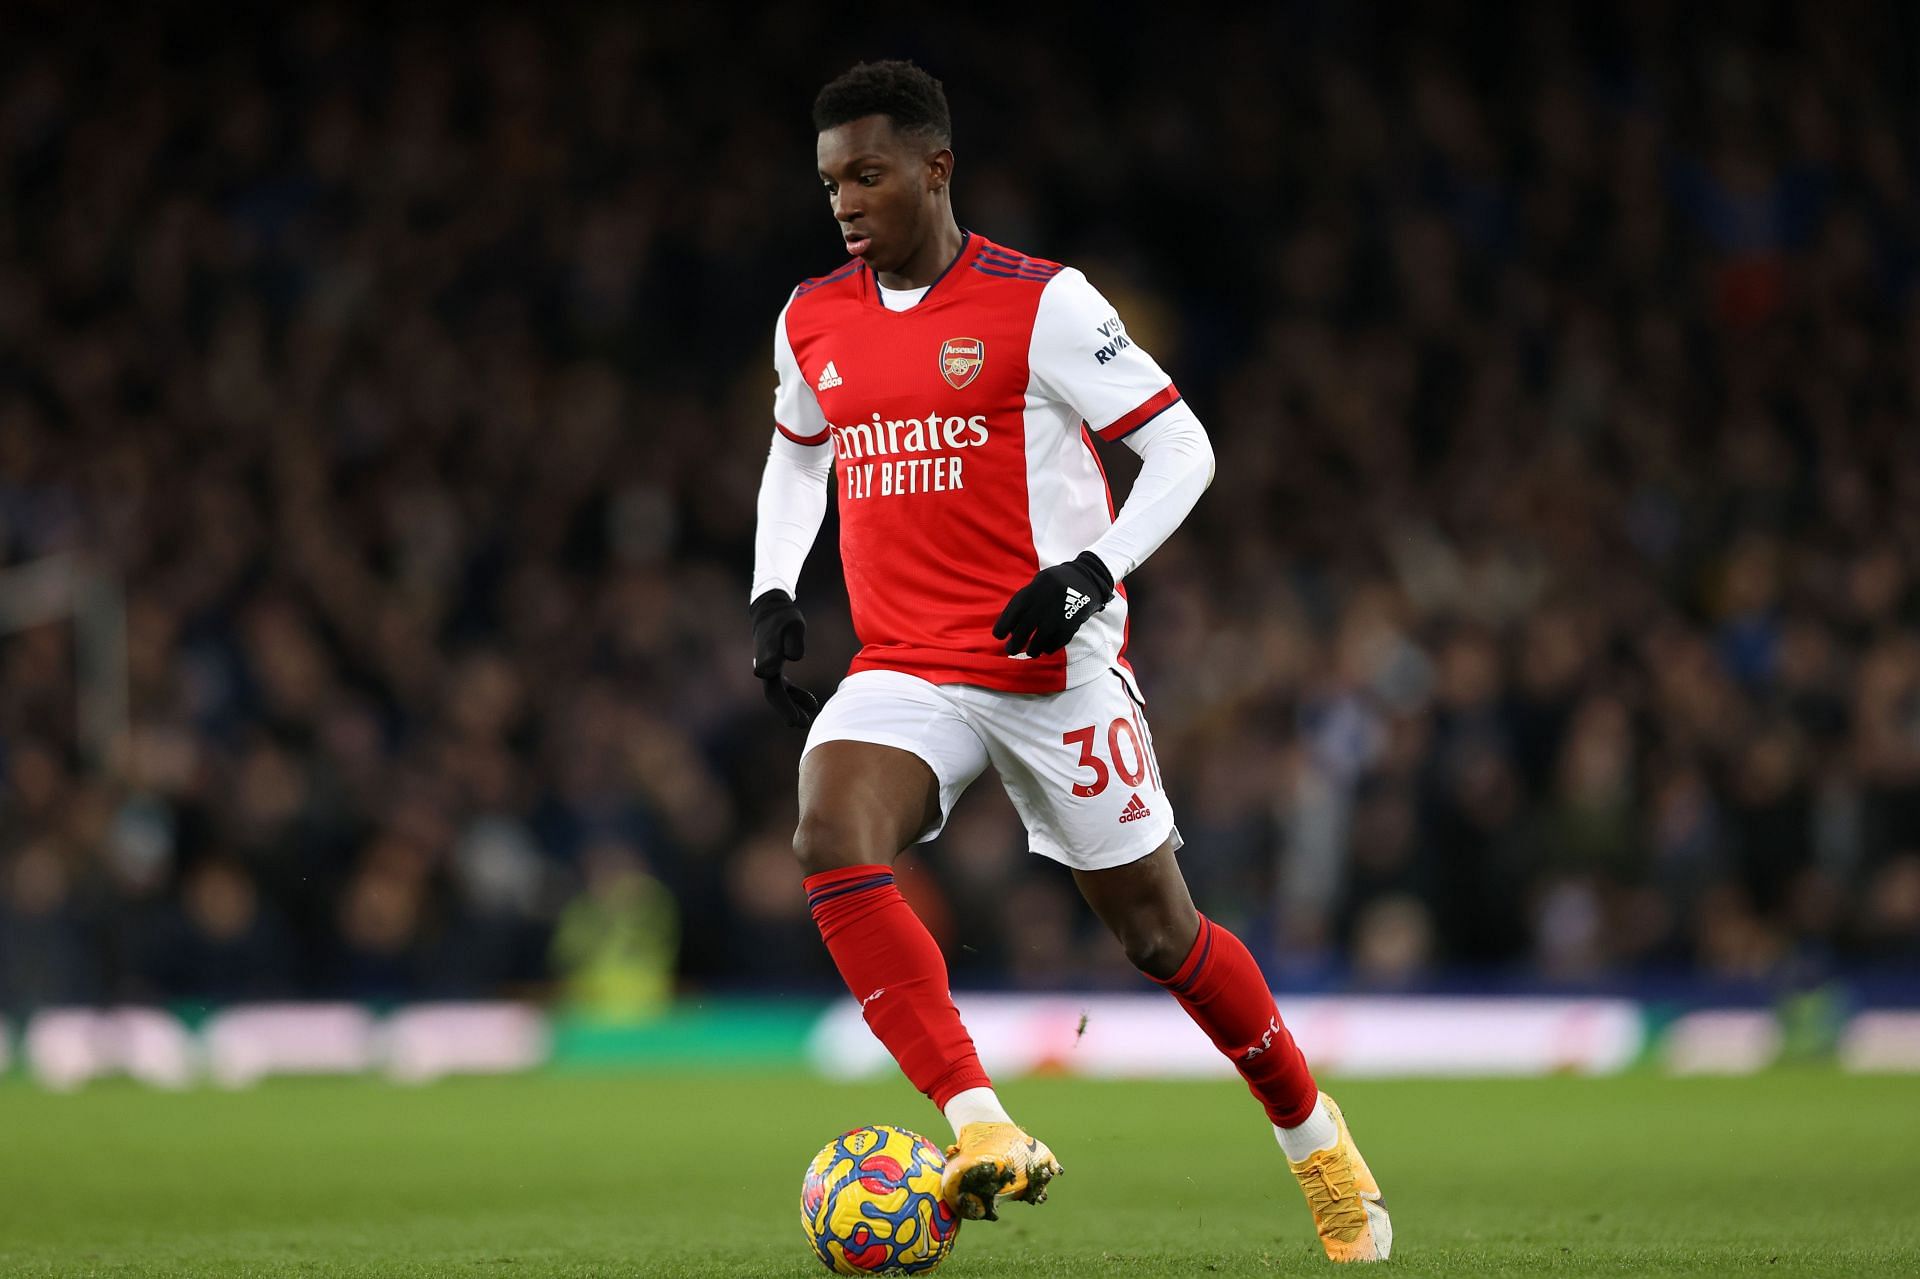 Aston Villa are contemplating a move for Nketiah this month.